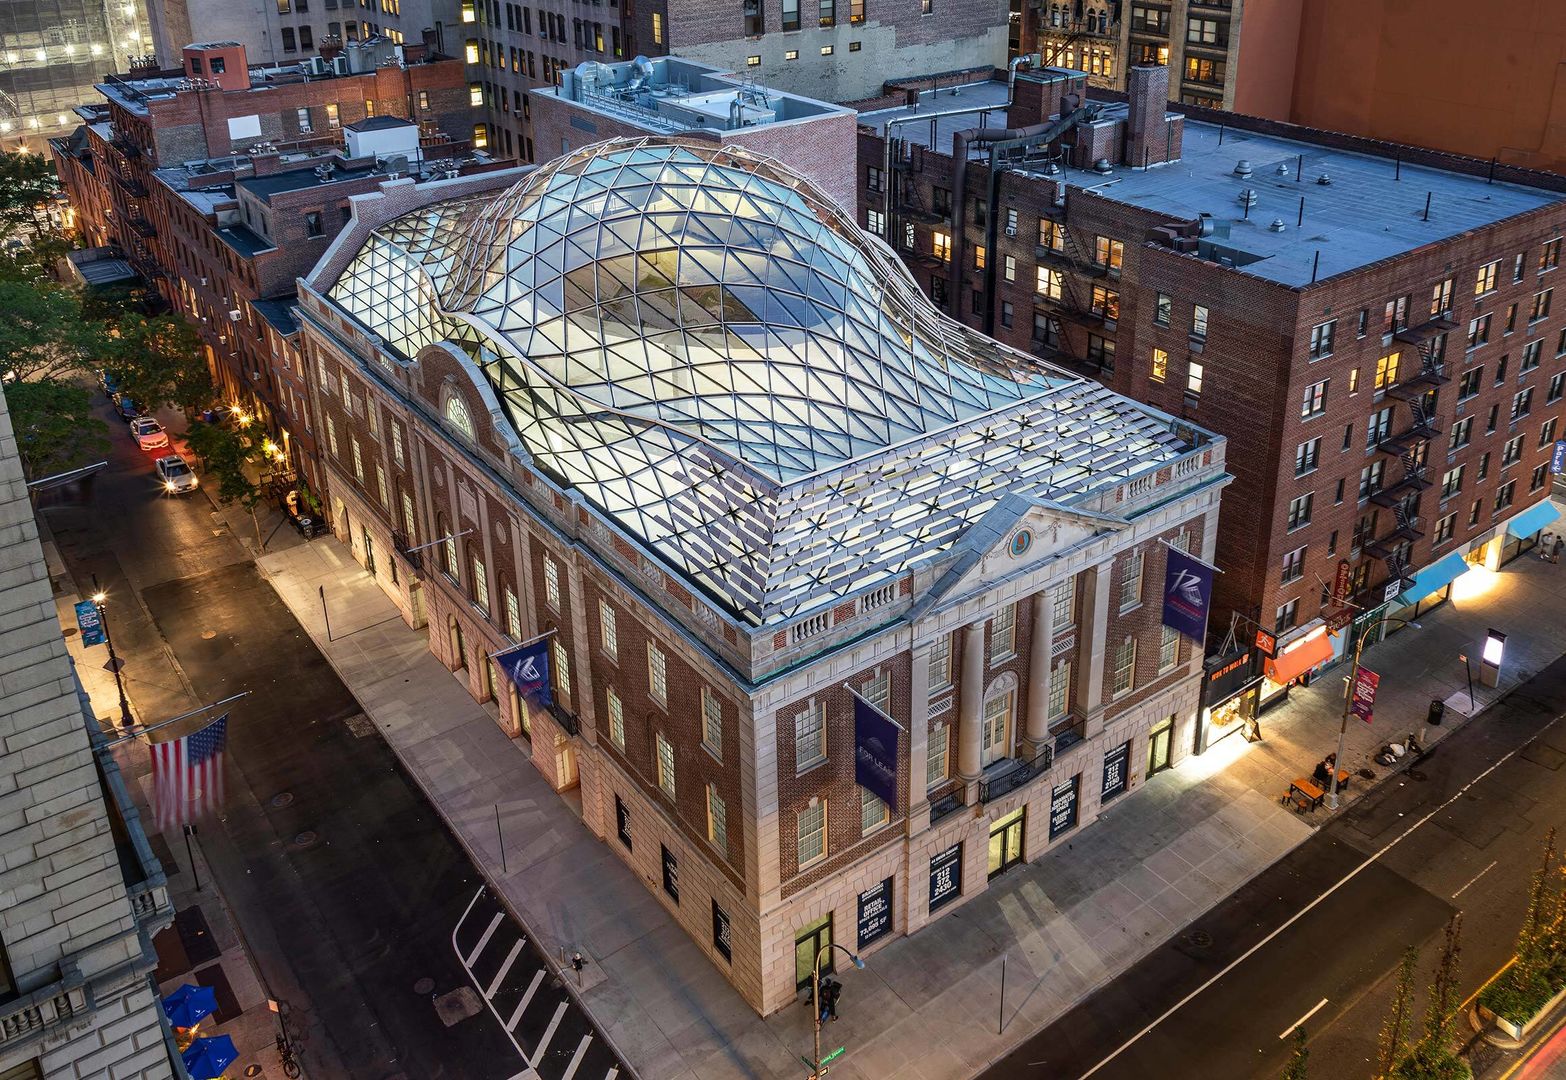 A photo of Tammany Hall showing its turtleshell dome